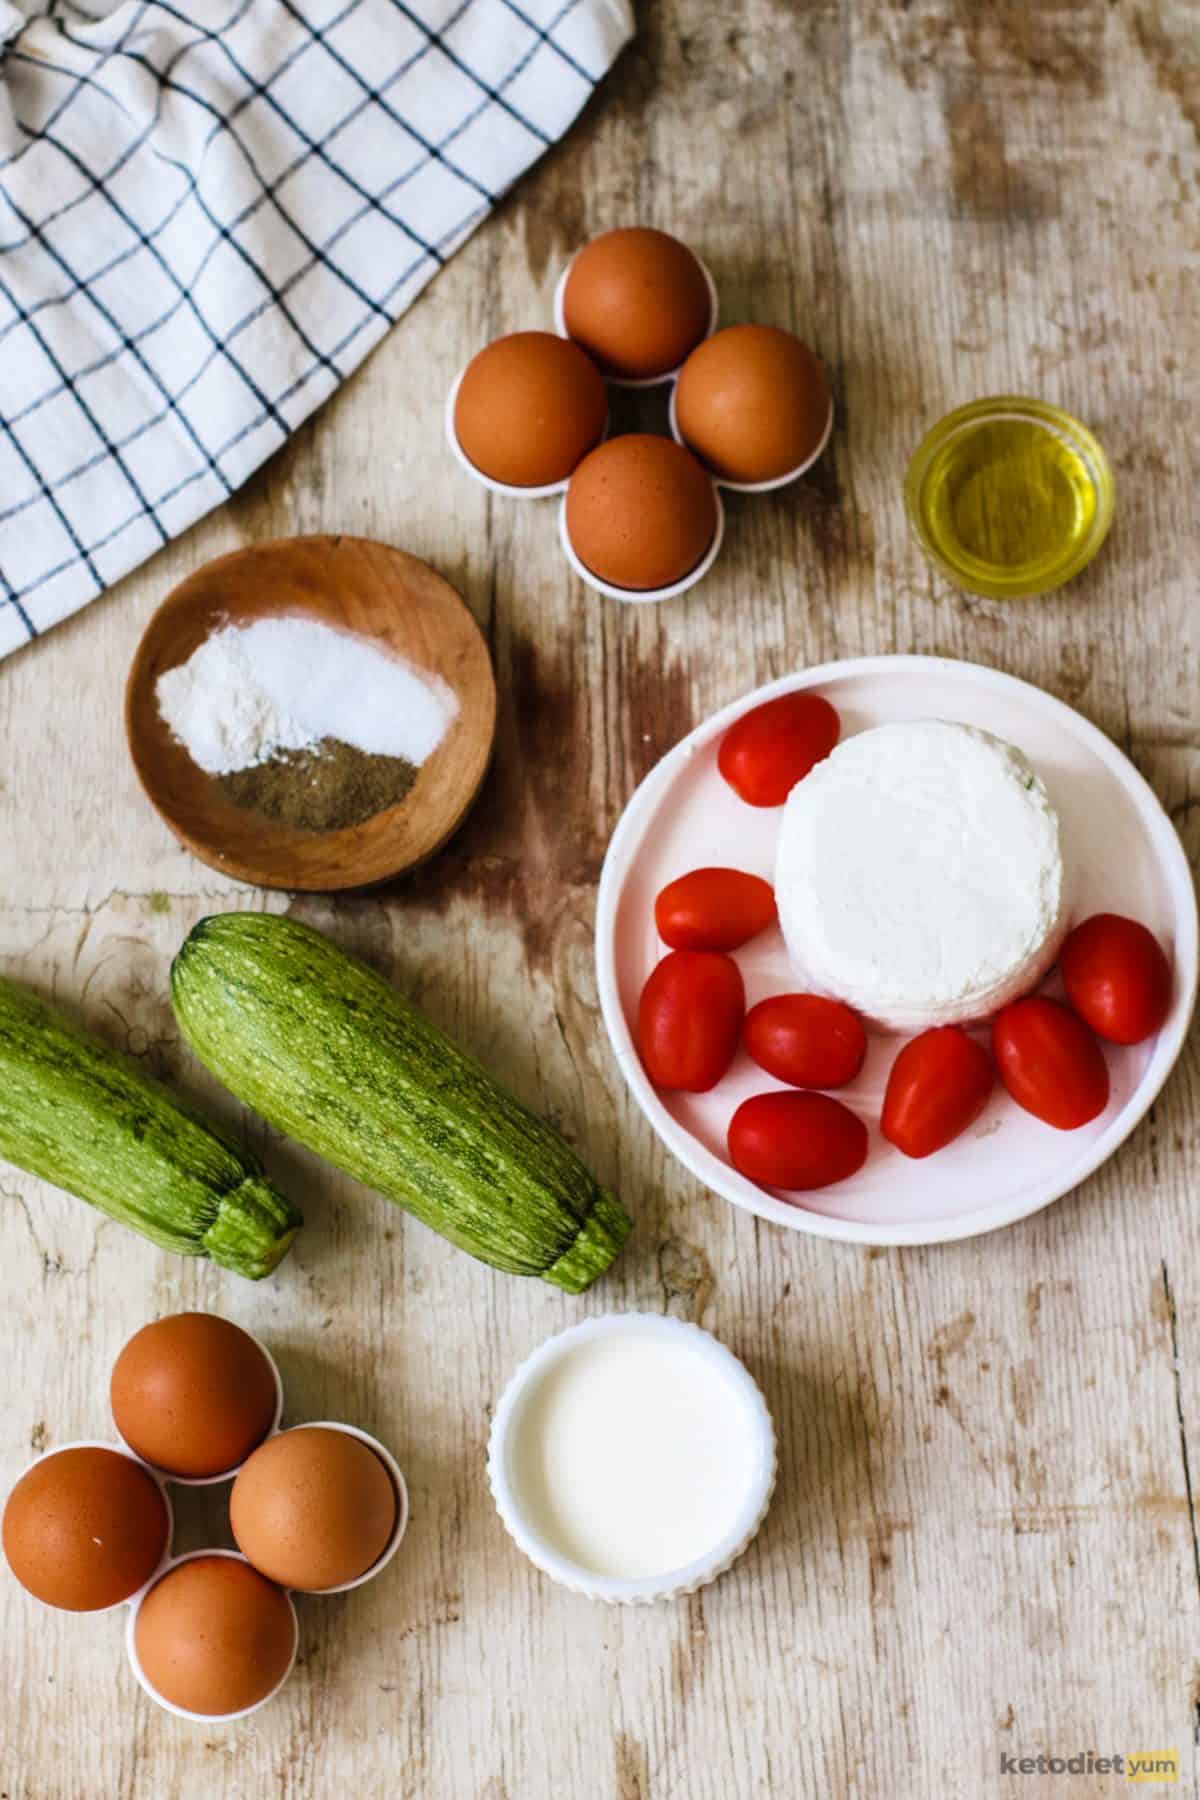 Ingredients to make a keto frittata arranged on a table